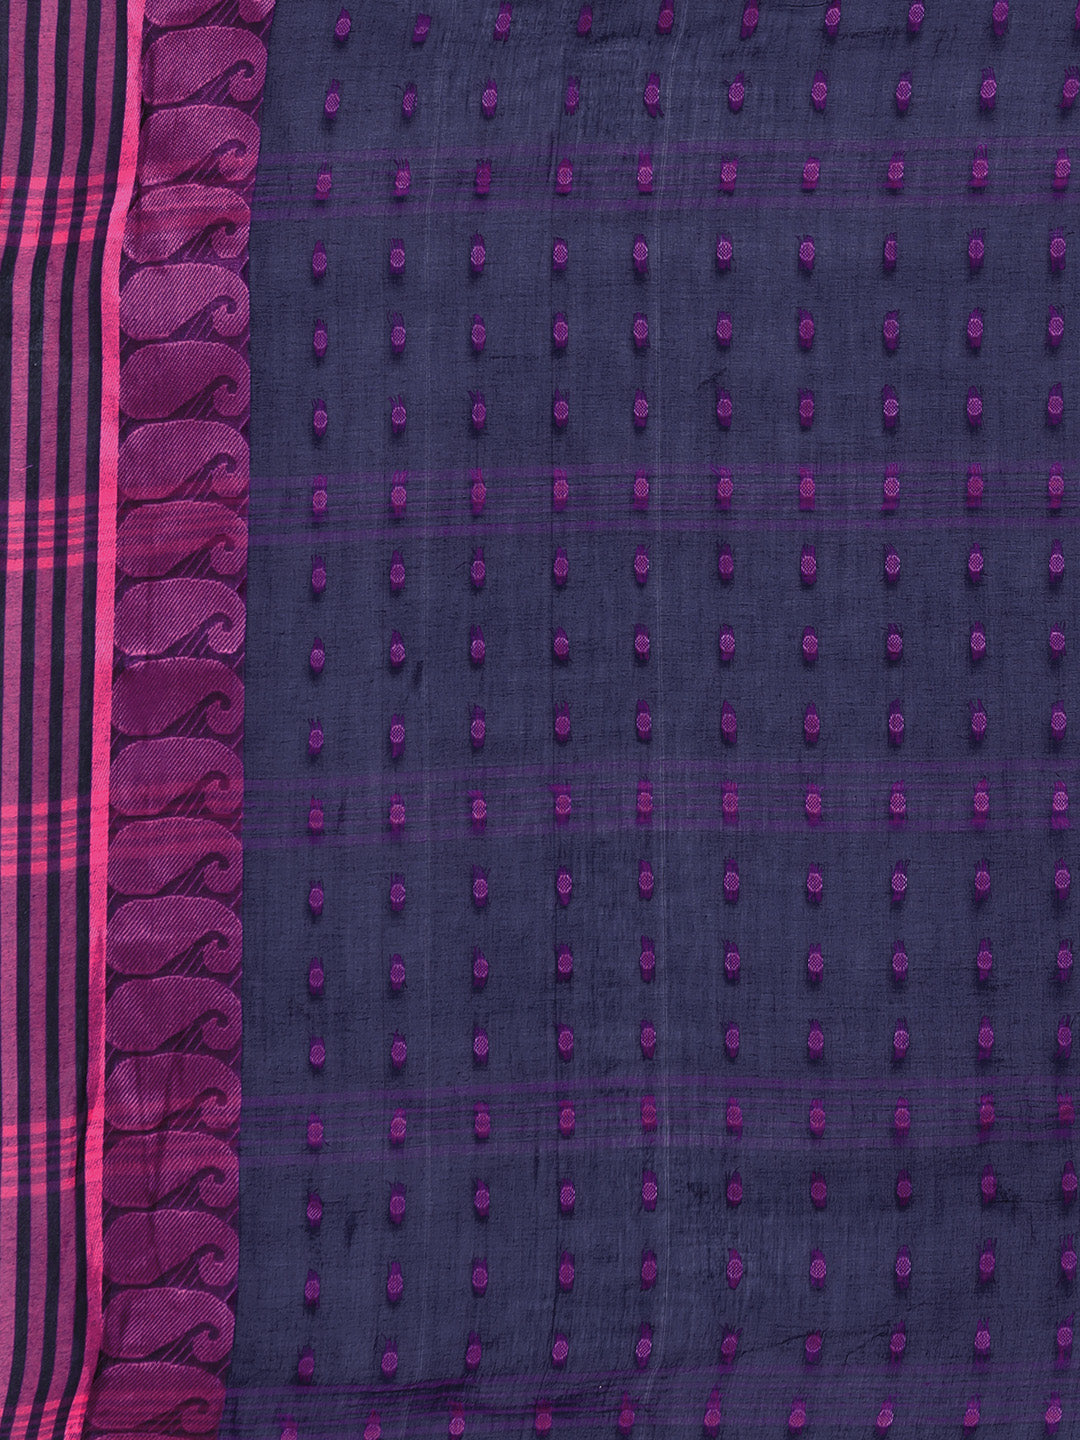 Purple Tant Woven Design Saree Without Blouse Piece DUTASA035 DUTASA035-Saree-Kalakari India-DUTASA035-Geographical Indication, Hand Crafted, Heritage Prints, Natural Dyes, Sarees, Silk Cotton, Sustainable Fabrics, Taant, Tant, West Bengal, Woven-[Linen,Ethnic,wear,Fashionista,Handloom,Handicraft,Indigo,blockprint,block,print,Cotton,Chanderi,Blue, latest,classy,party,bollywood,trendy,summer,style,traditional,formal,elegant,unique,style,hand,block,print, dabu,booti,gift,present,glamorous,affordab